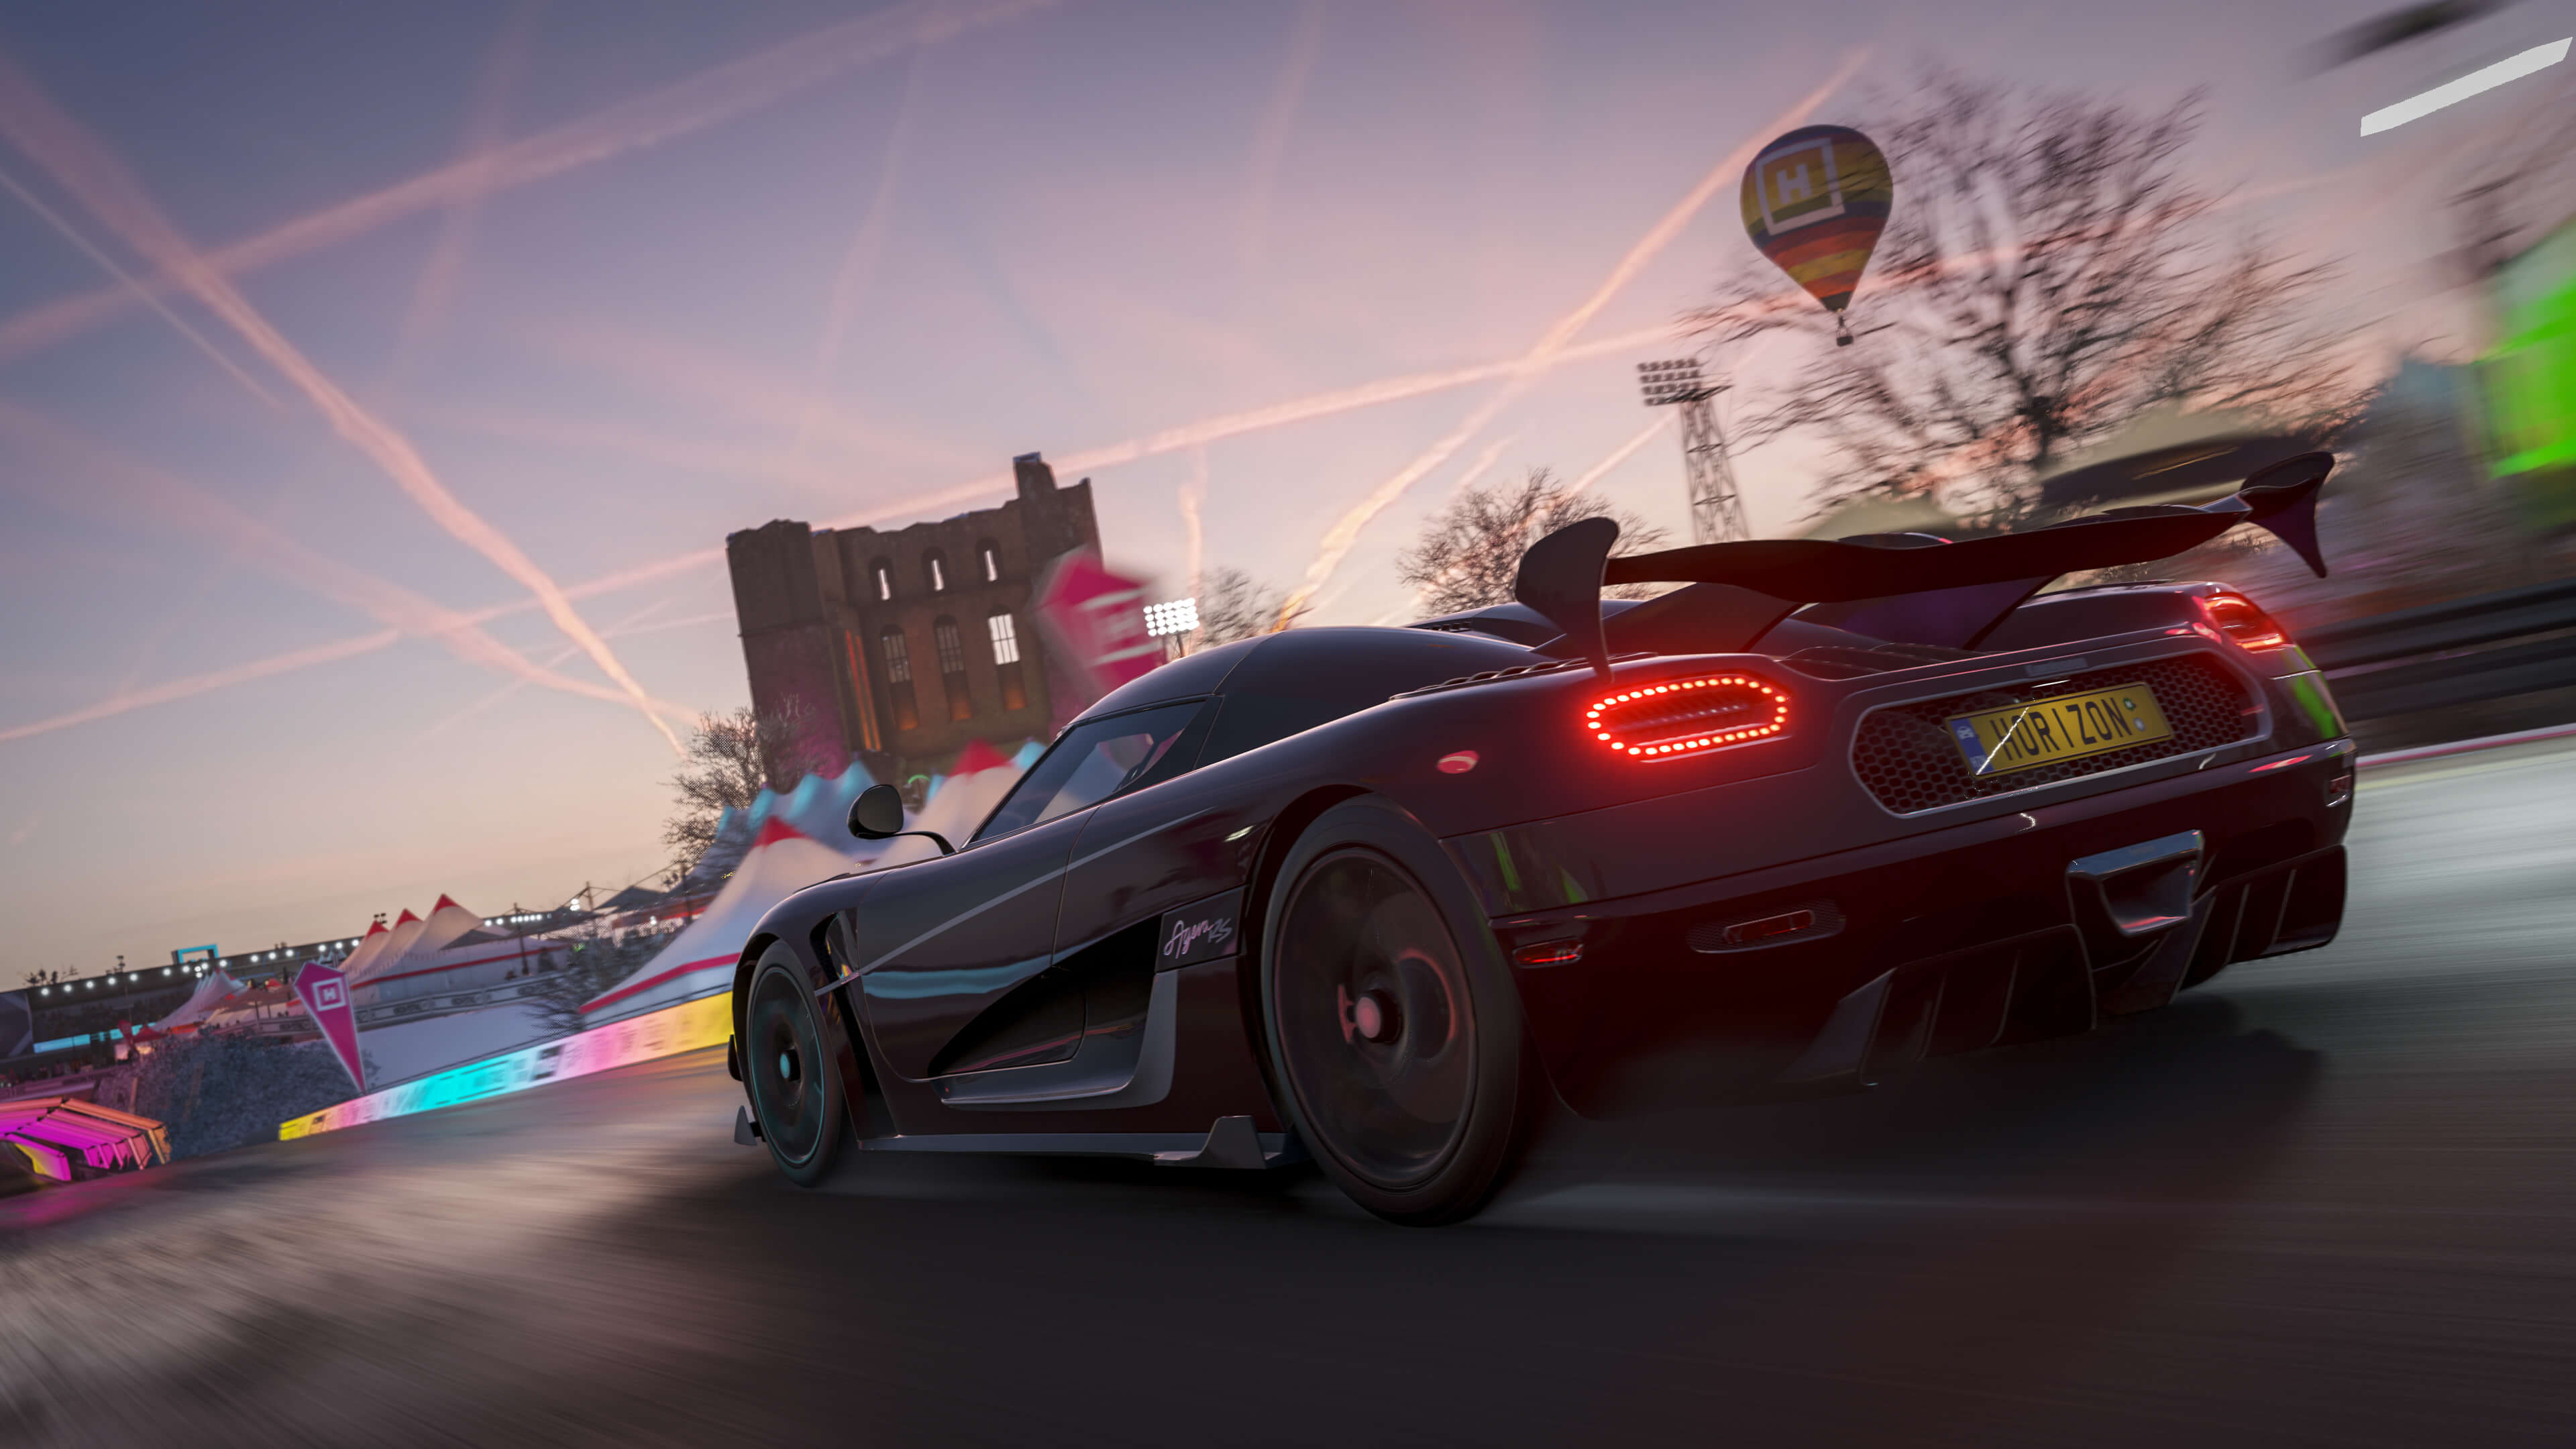 Forza Horizon 4 - PC - 4K HDR Video 2 - High quality stream and download -  Gamersyde